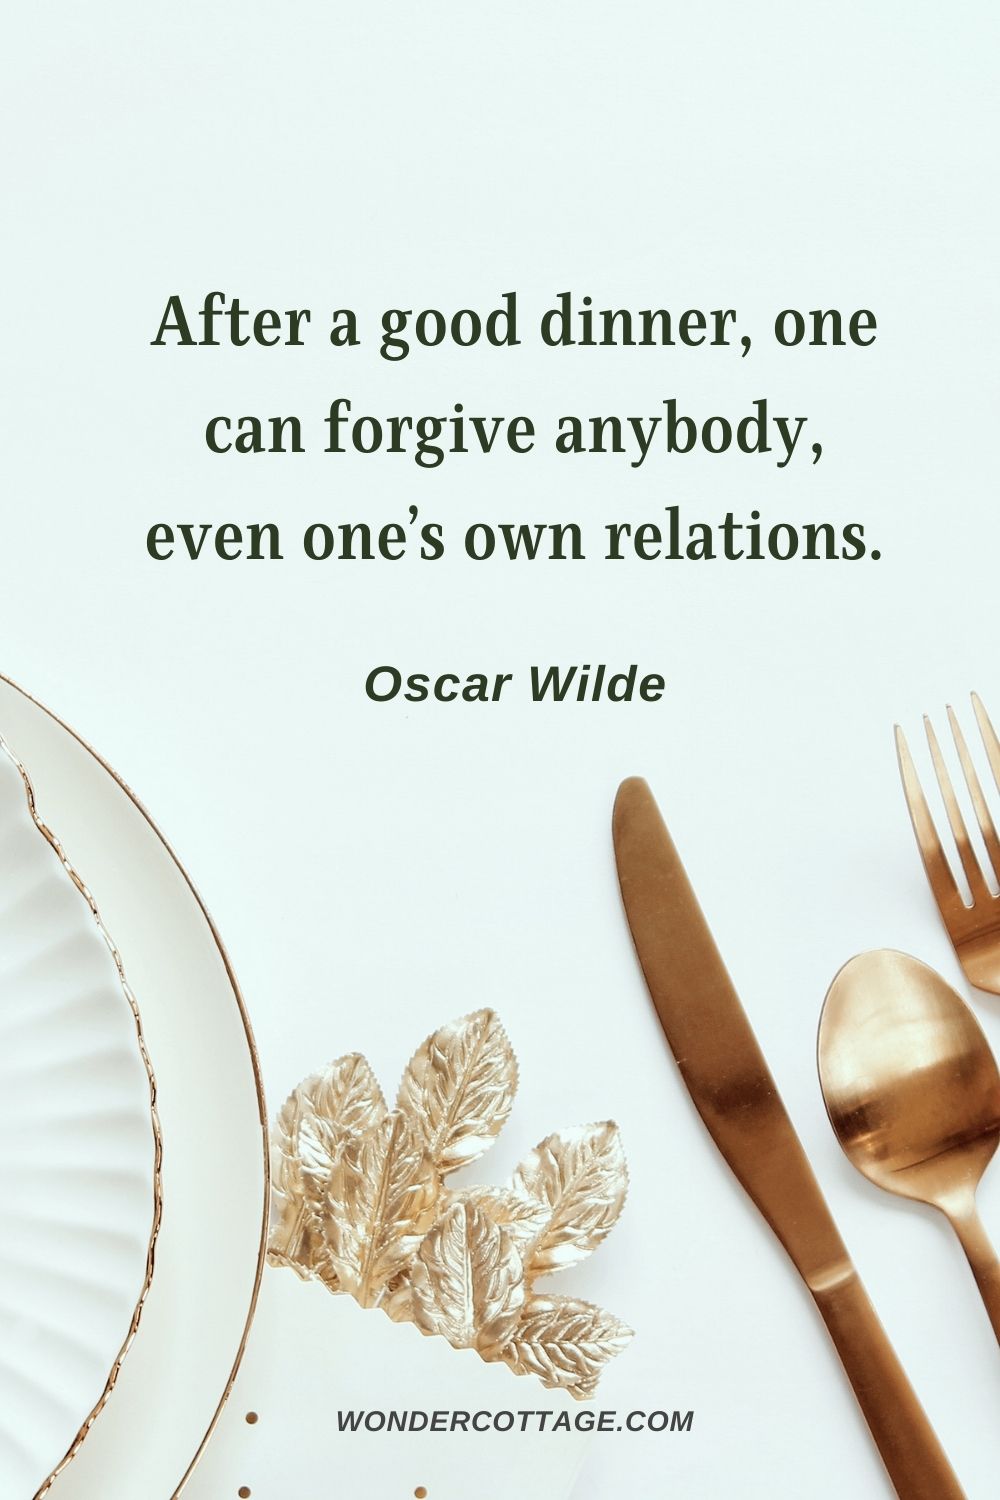 After a good dinner, one can forgive anybody, even one’s own relations. Oscar Wilde